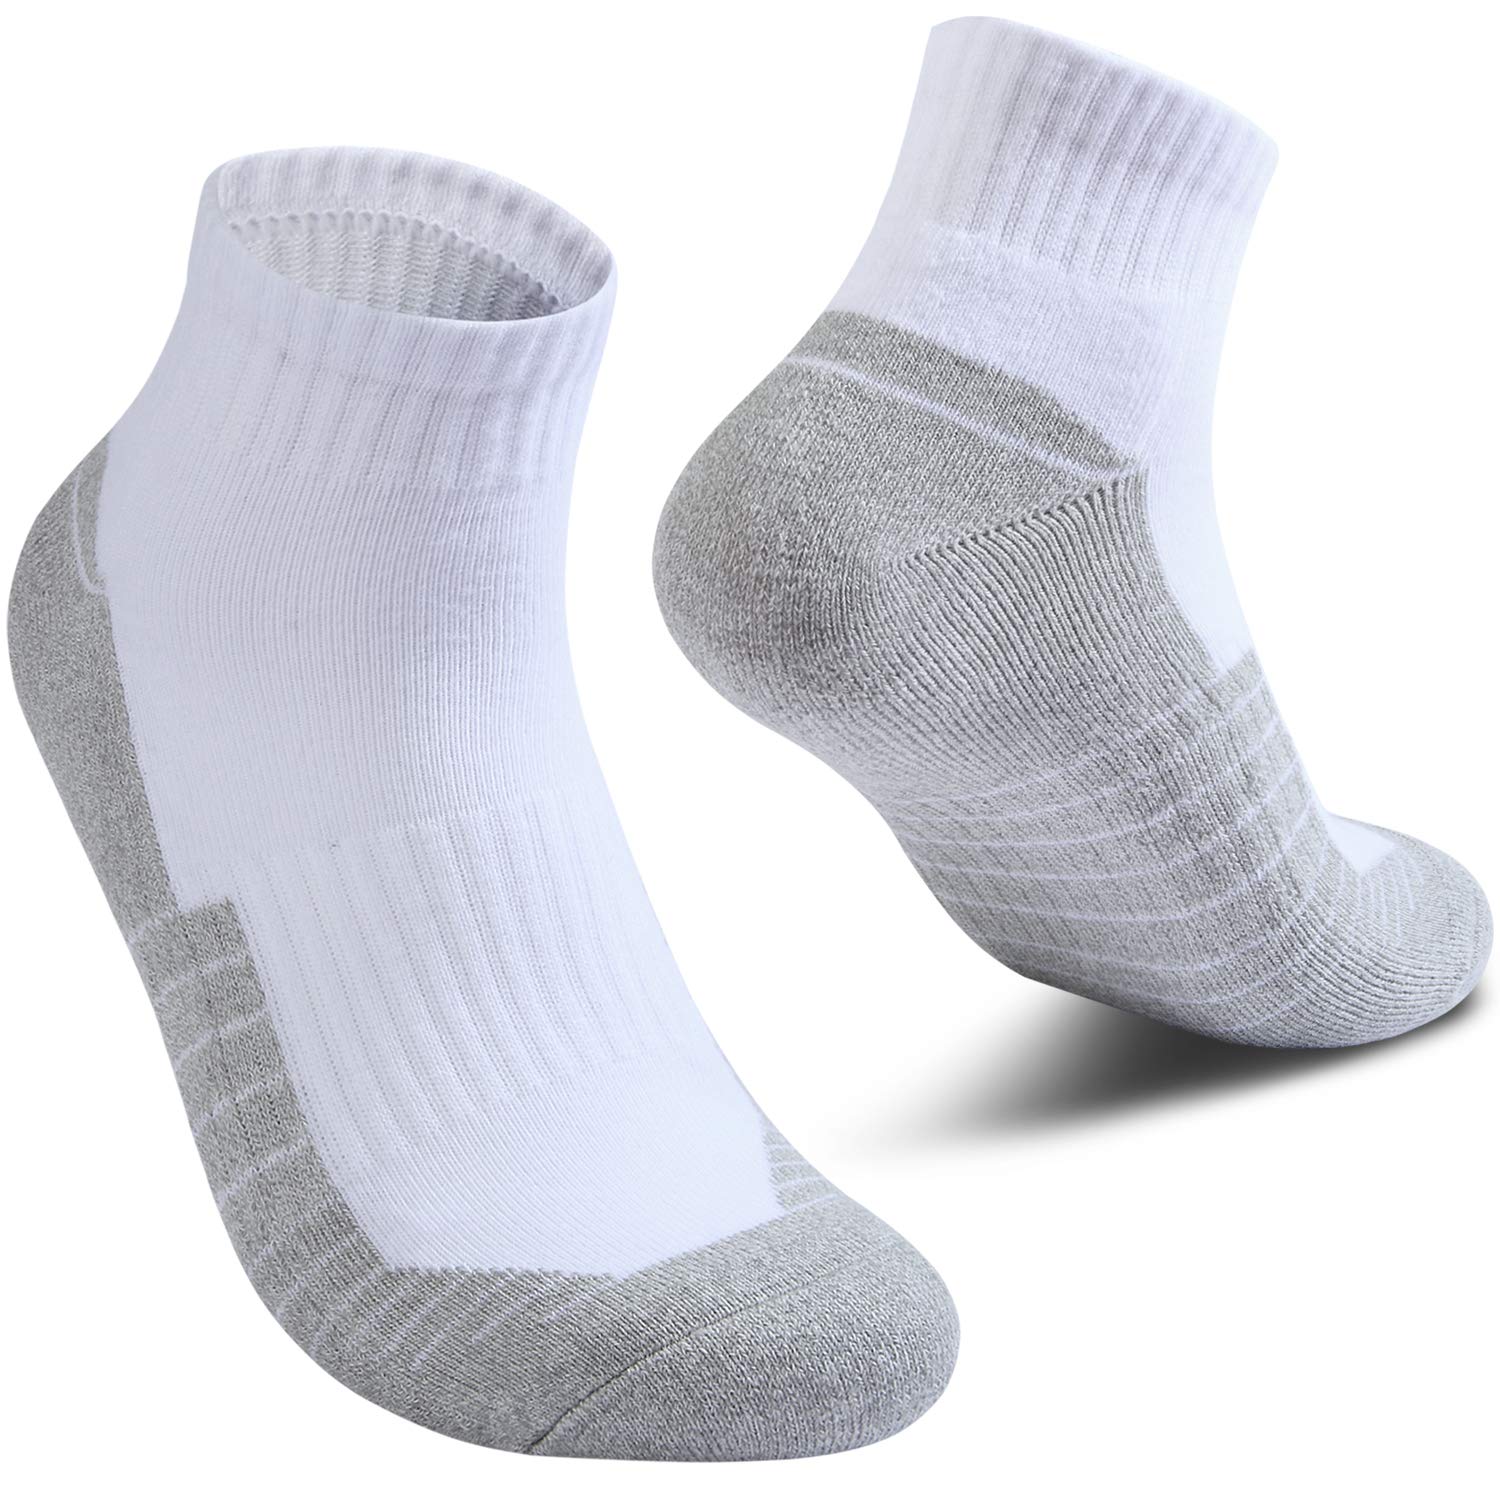 Begrily Cotton Socks for Men Low Cut, Max Cushion Thick Athletic Ankle Mens Sock for Hiking Running Sport Work 6 Pack Color Assorted Size 6-12